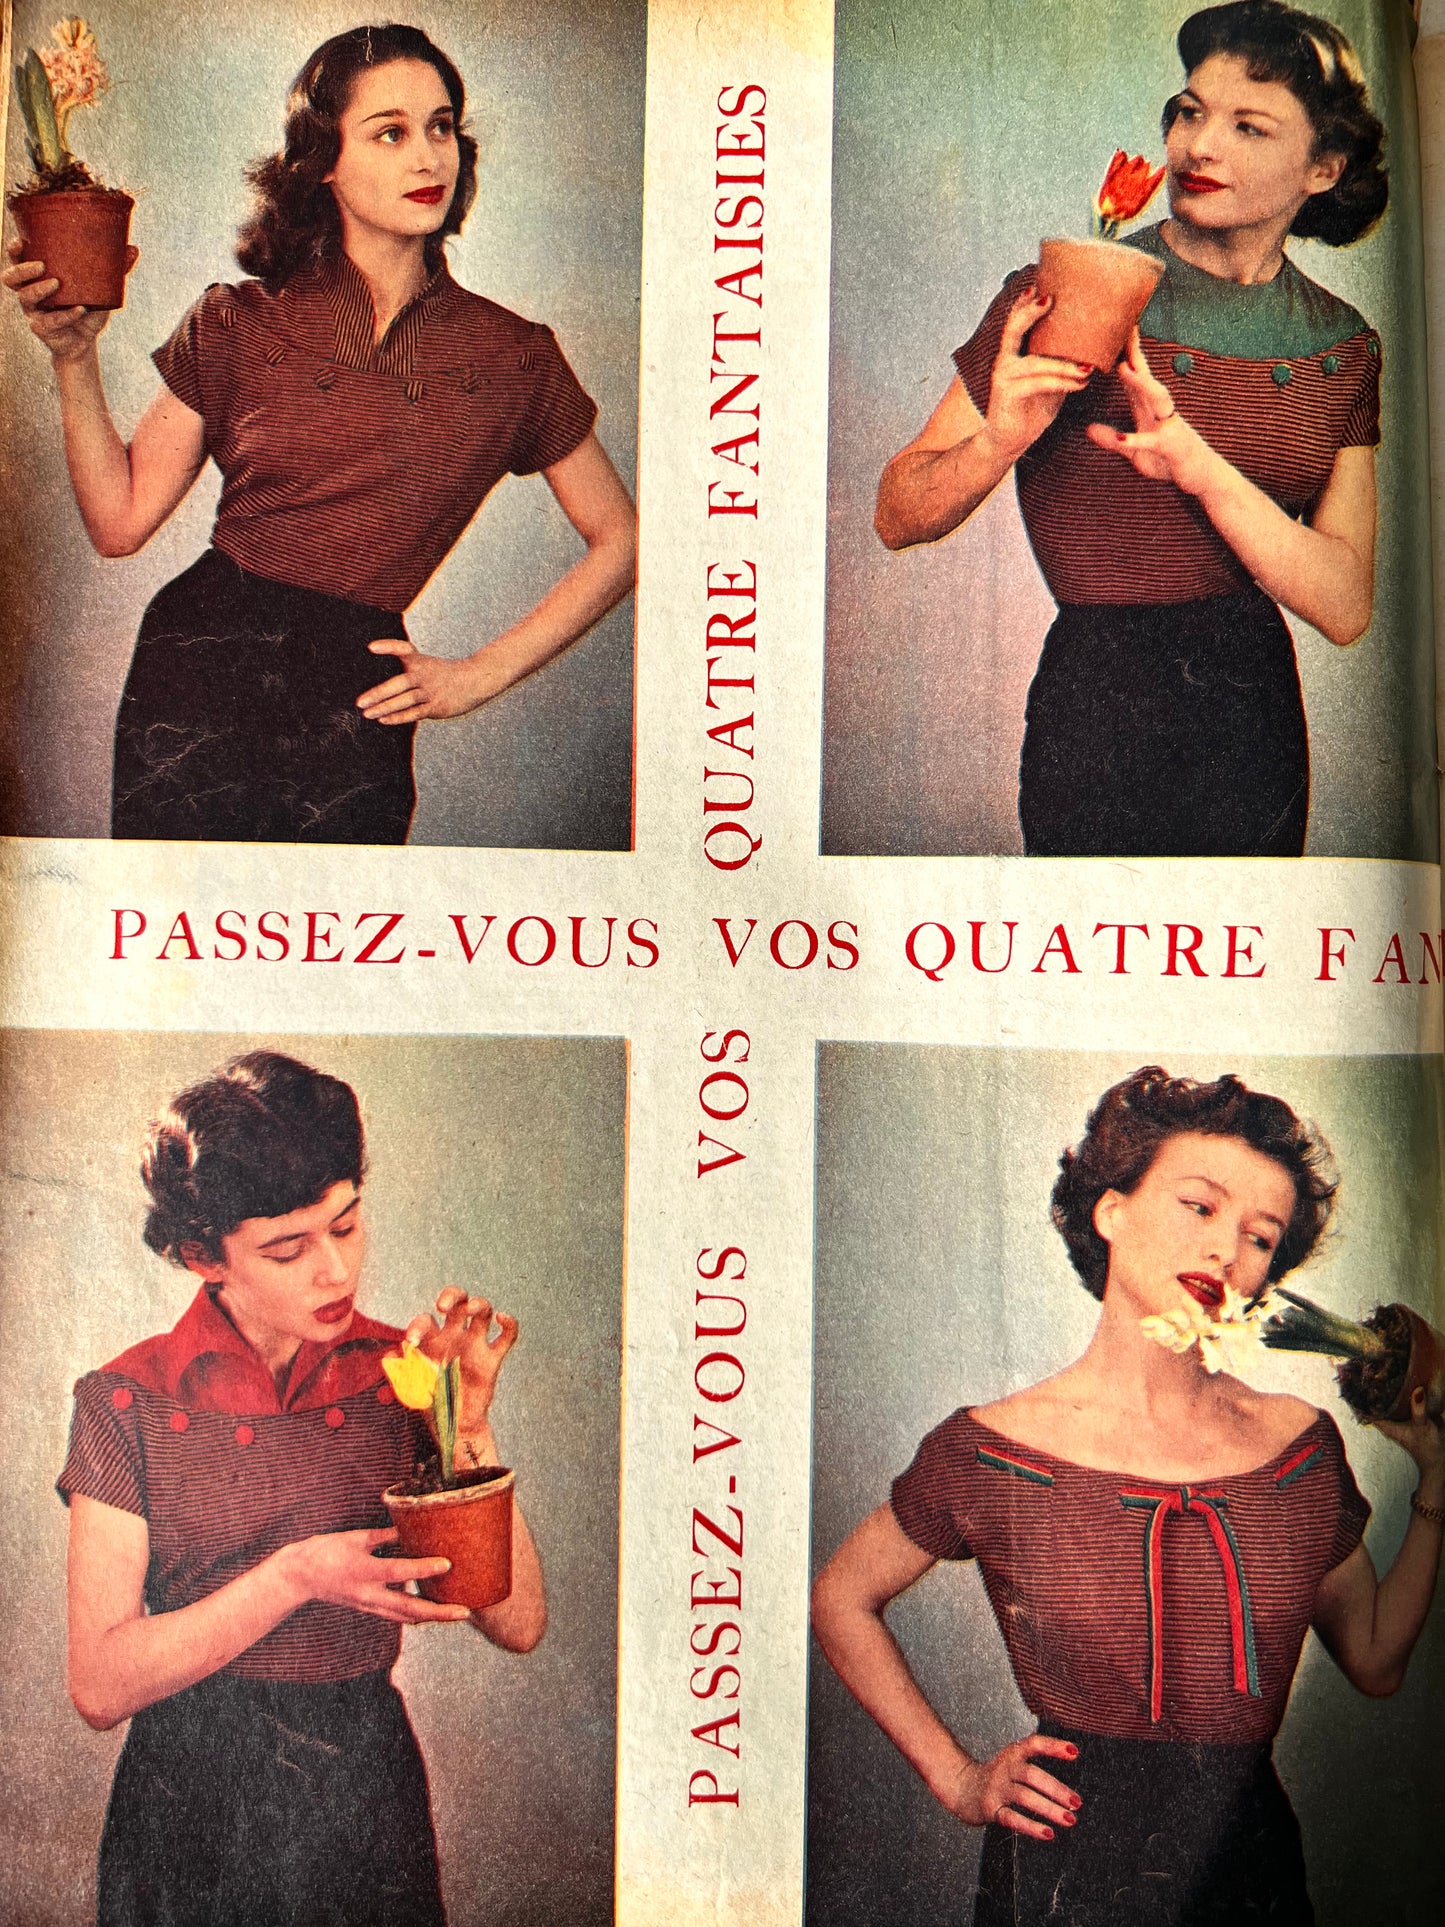 Winter Elegance in January 1951 French Women's Paper Marie France